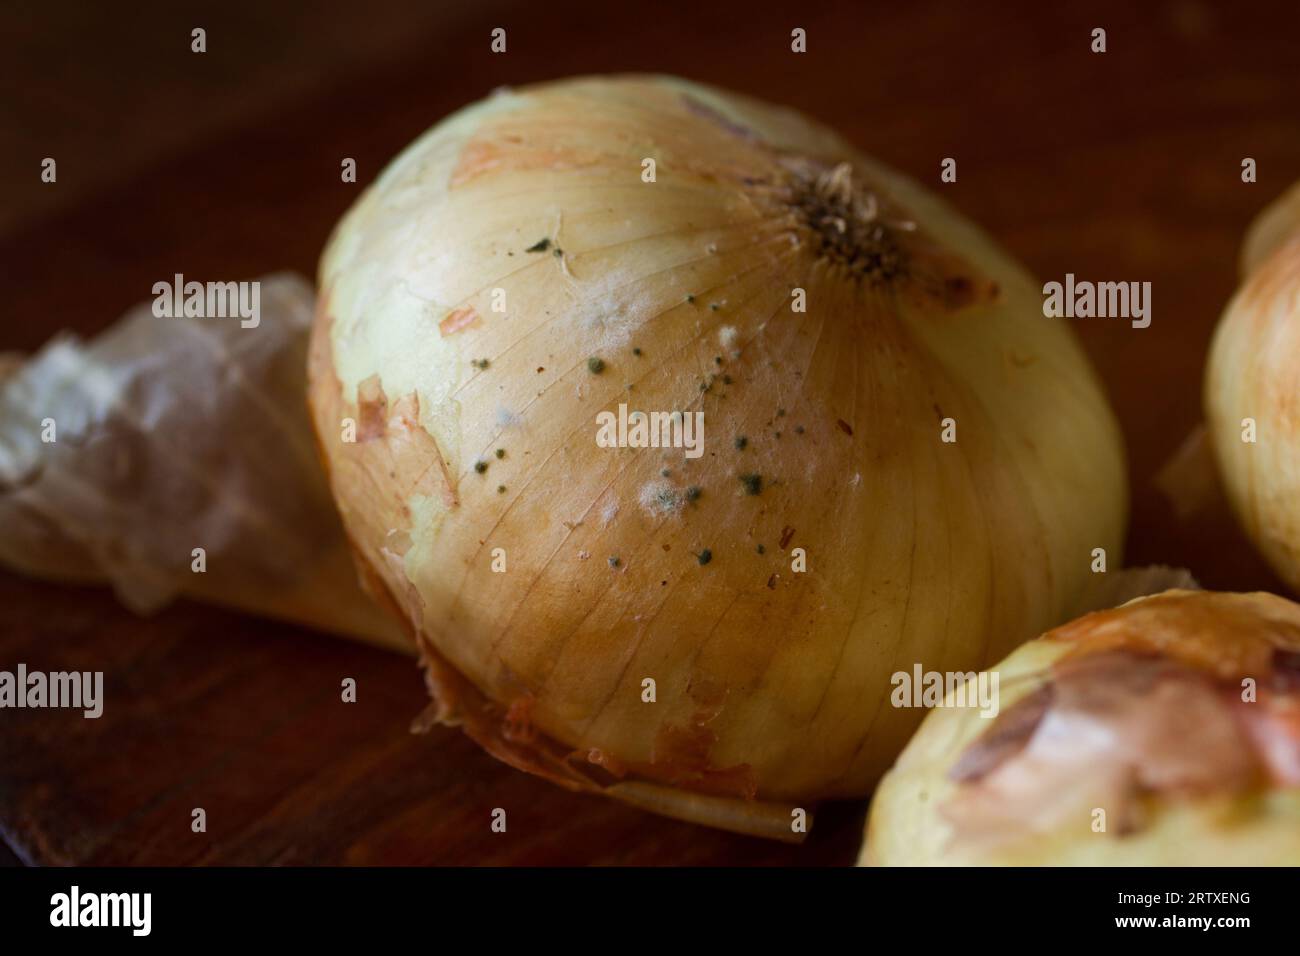 Photograph of white onions in a state of decomposition with mushrooms. Food concept. Stock Photo